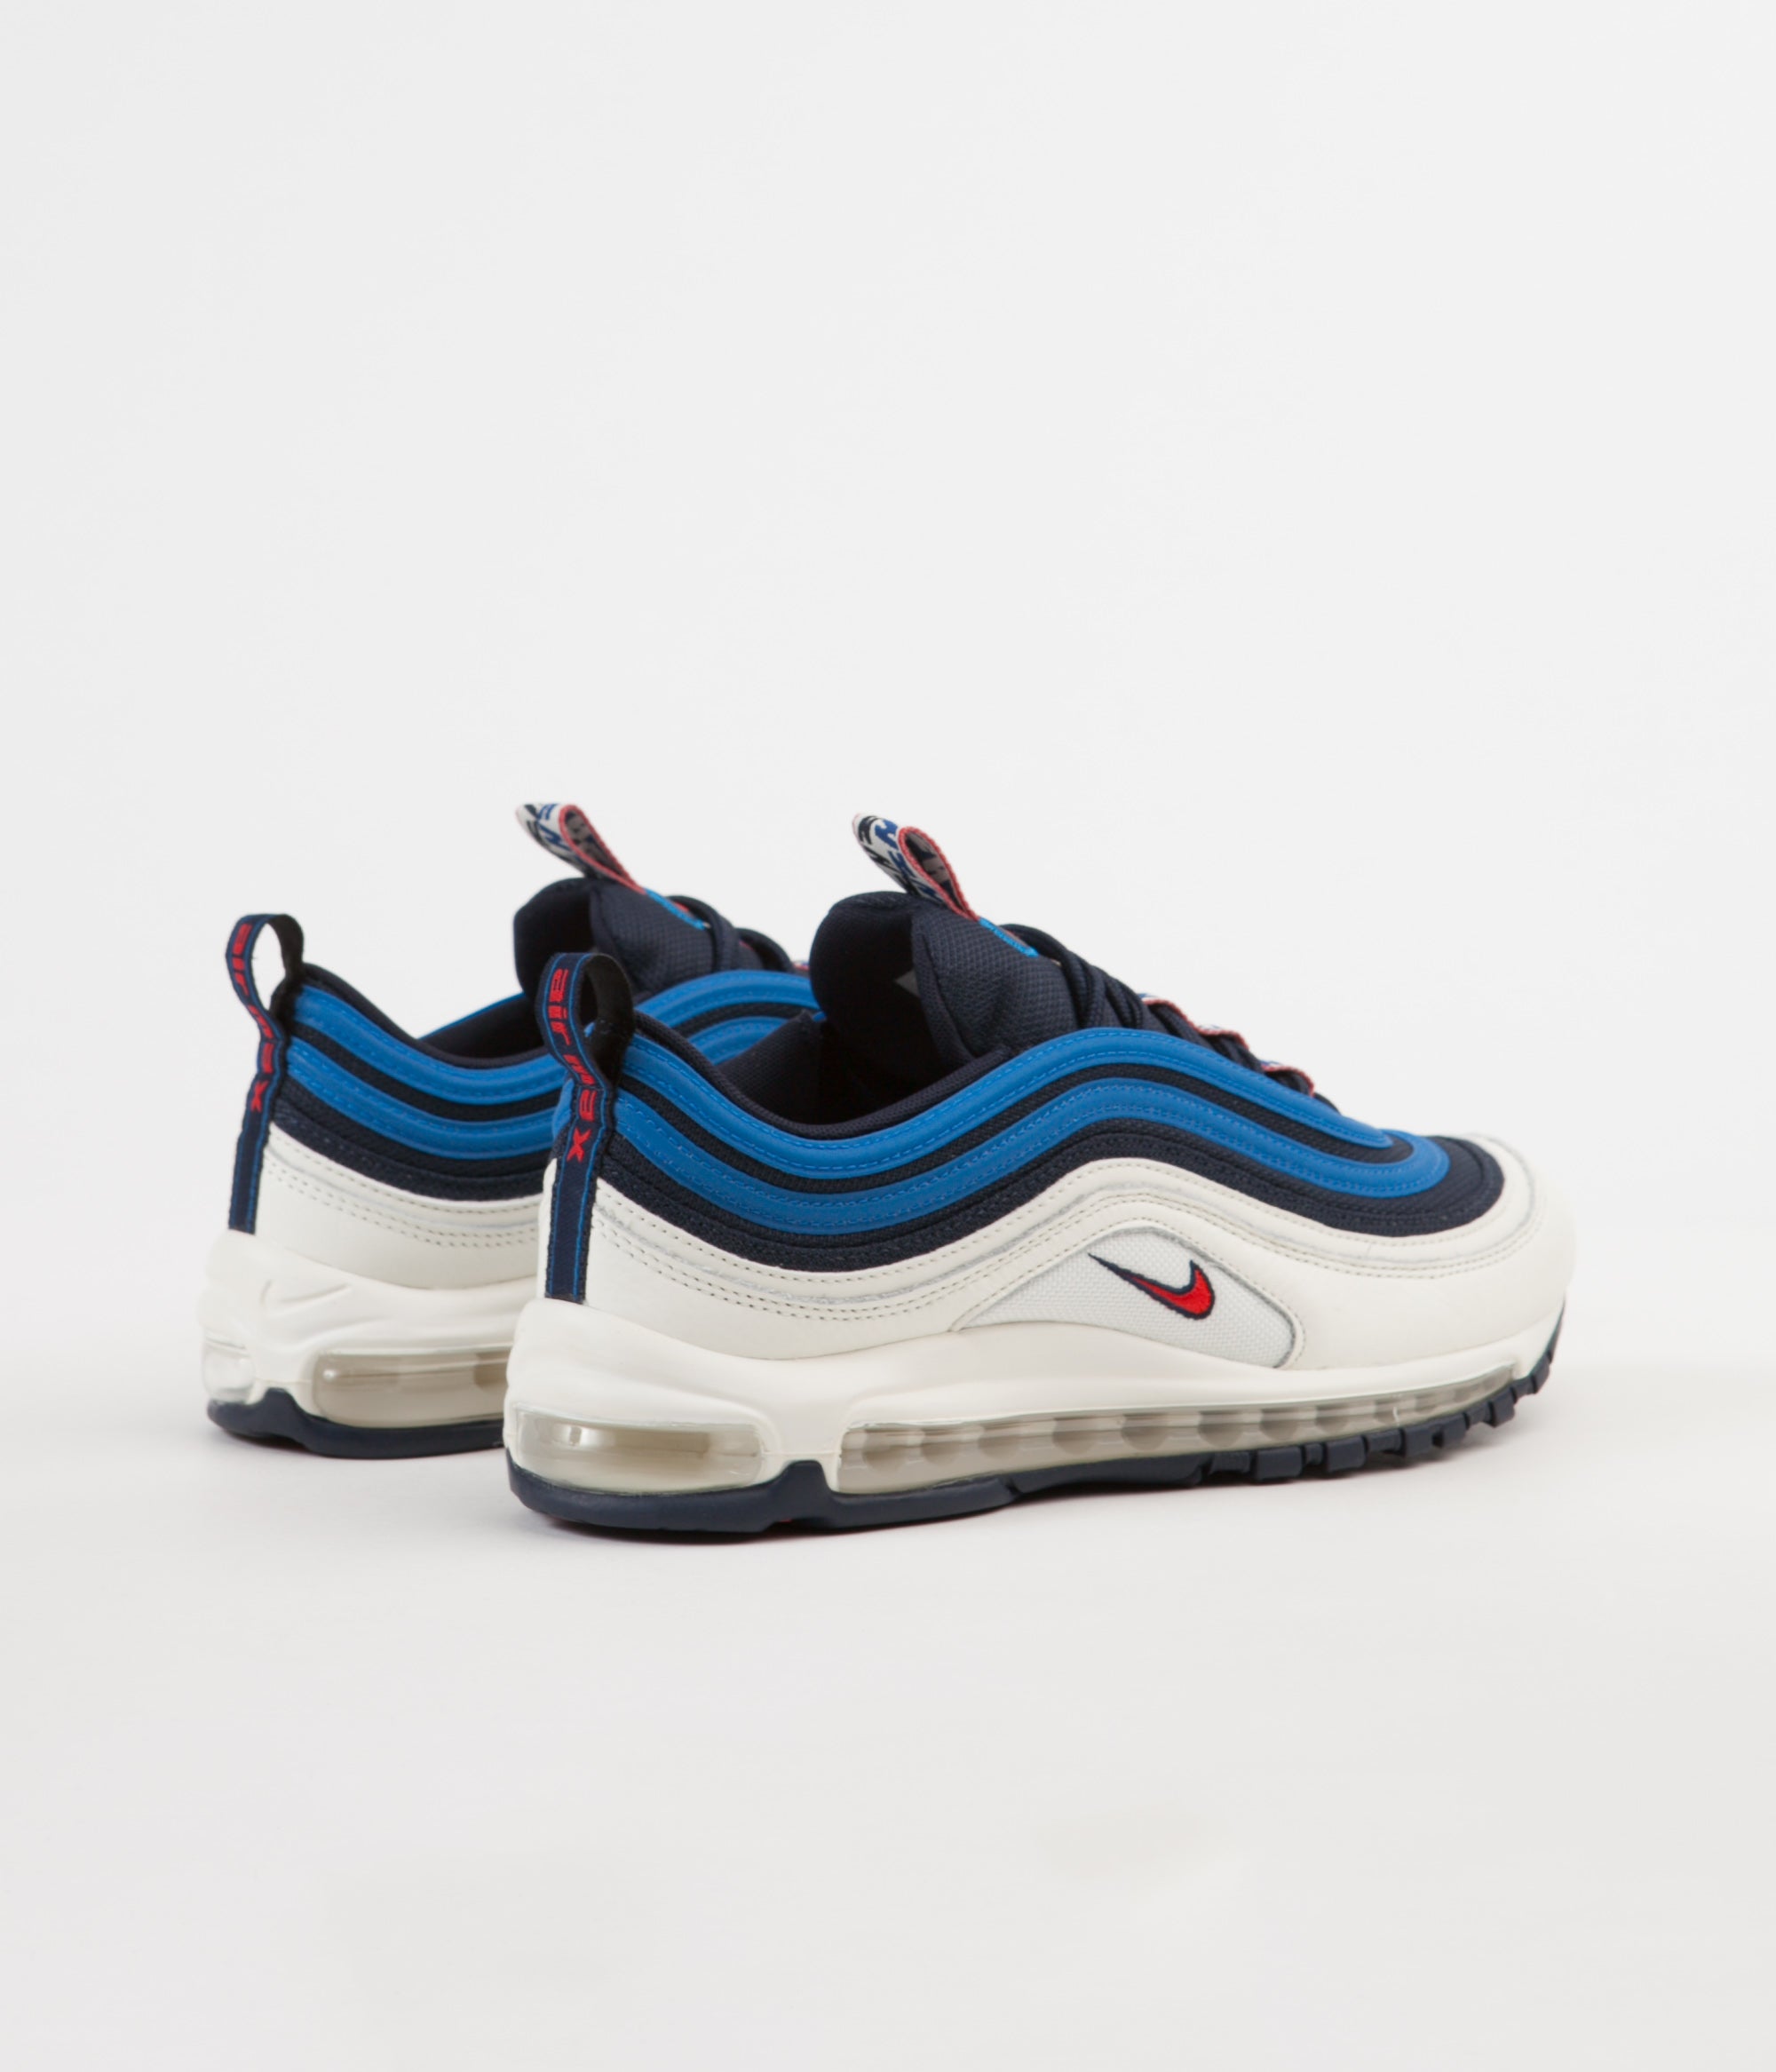 air max 97 obsidian university red